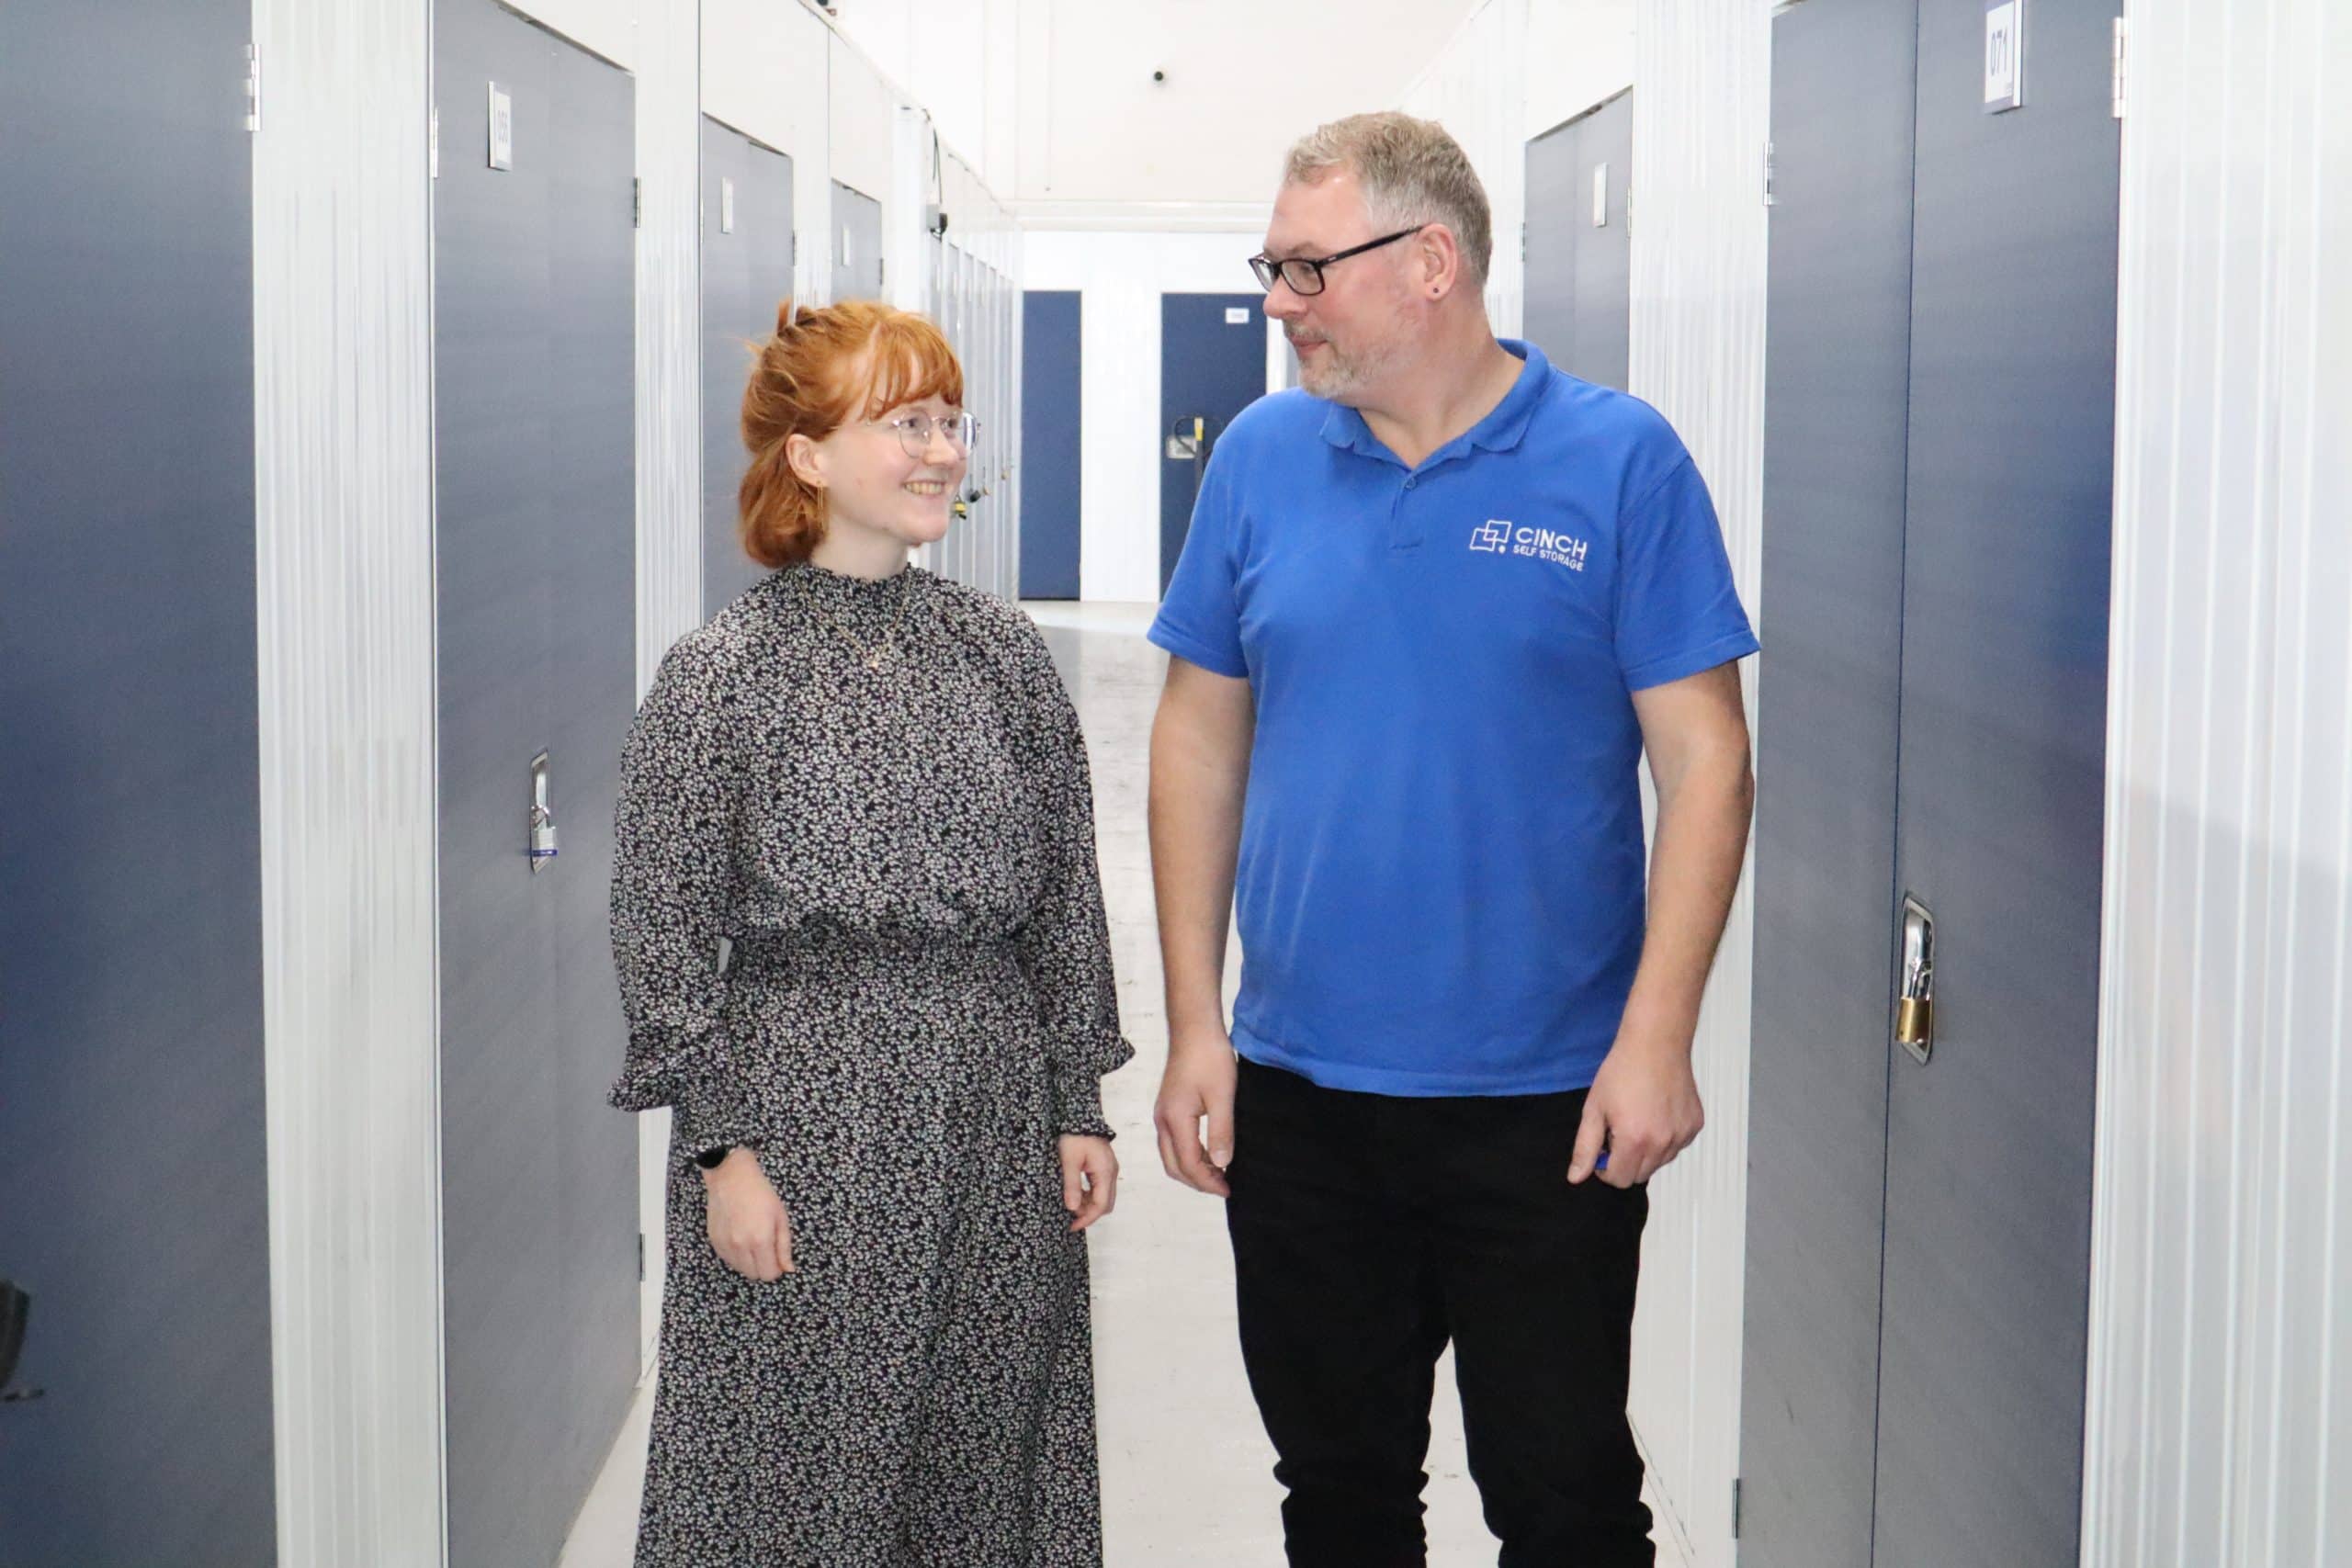 Going home for the summer? Our Brighton storage units will help. Image shows a female student and a member of the Cinch Self Storage team standing in the corridor with storage unit doors on either side of them.